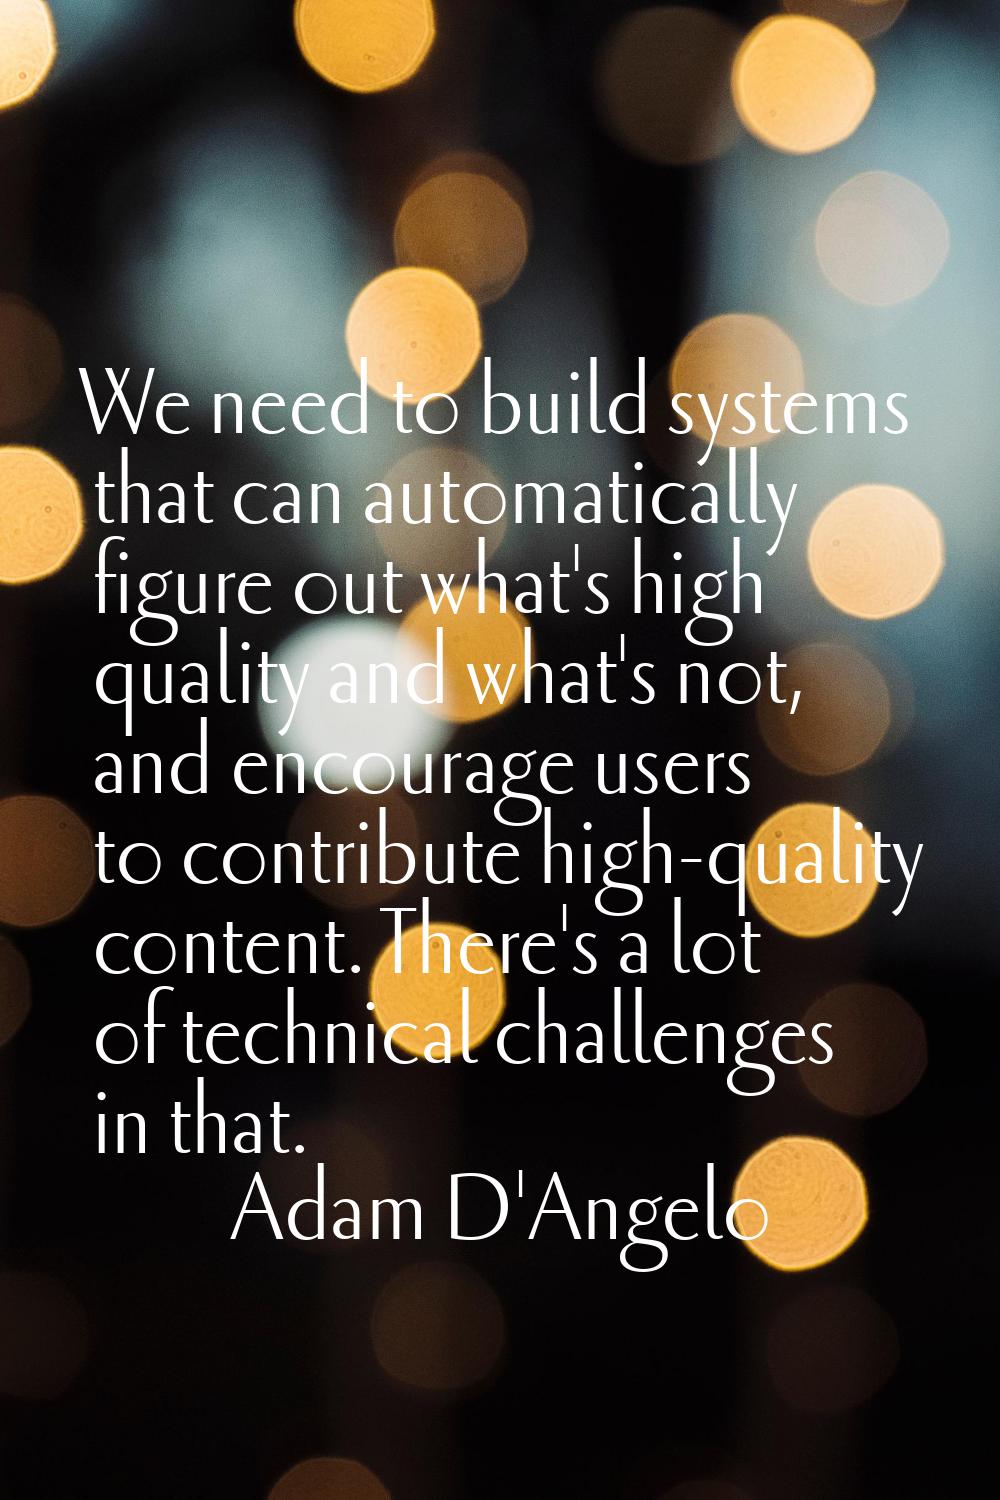 We need to build systems that can automatically figure out what's high quality and what's not, and 